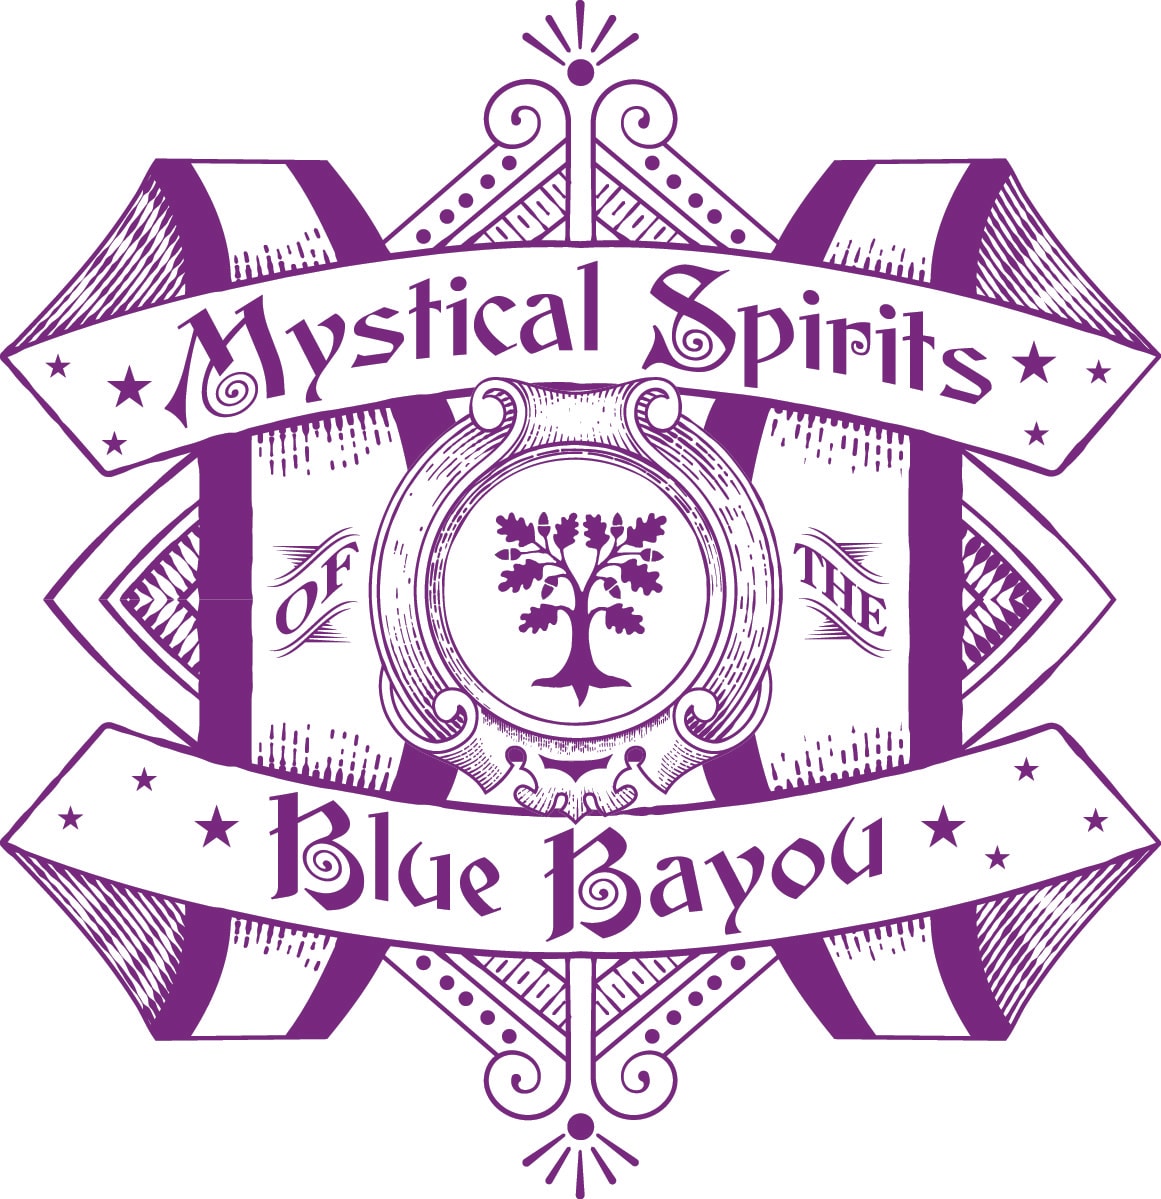 Mystical Spirits Of The Blue Bayou New Premium Dining Experience Coming To Mickey S Halloween Party At Disneyland Park Disney Parks Blog